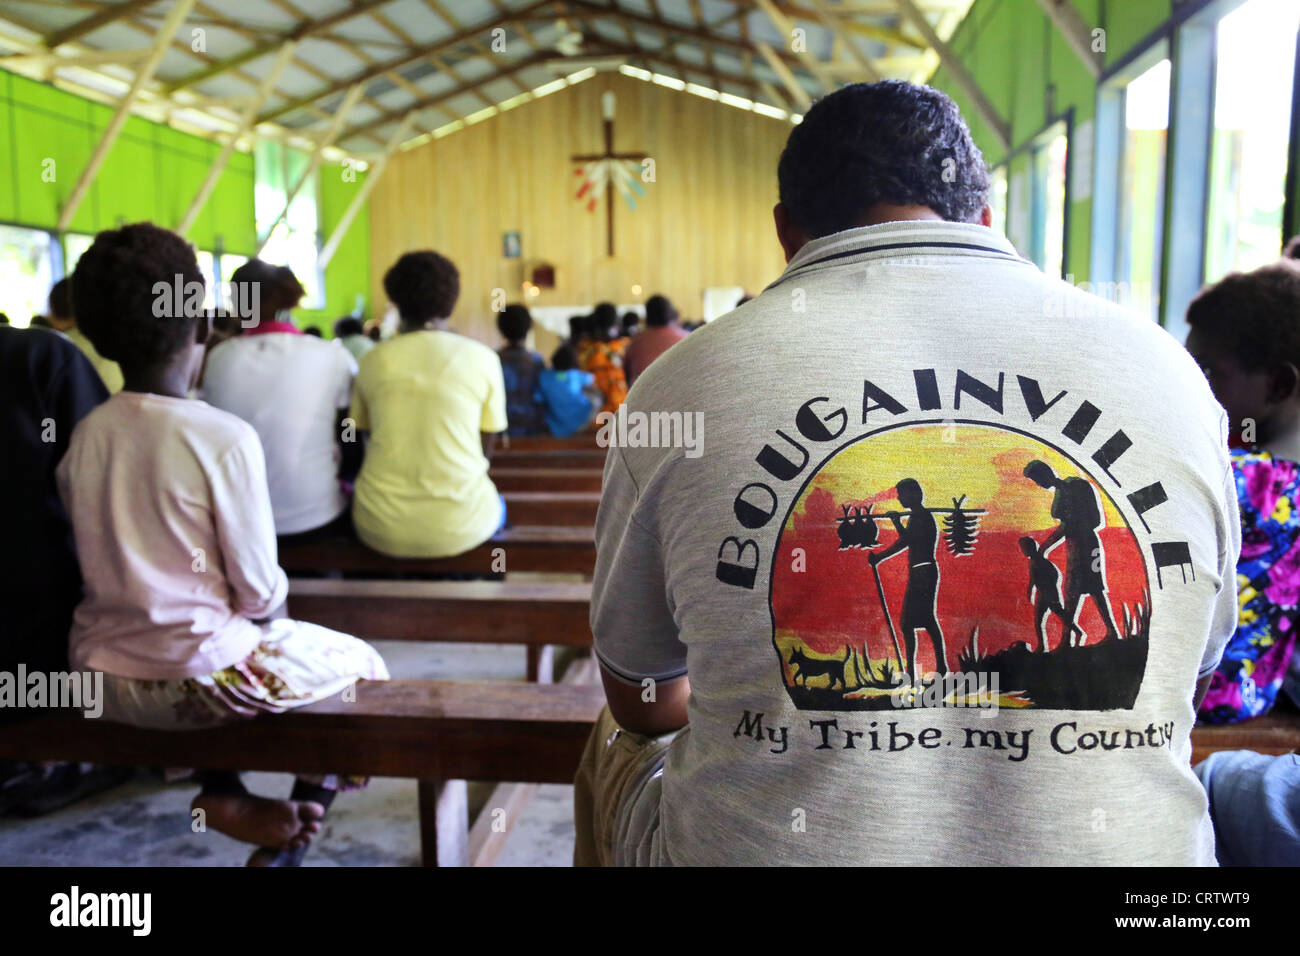 Papua New Guinea, Island of Bougainville. Sunday mass servive in a catholic church. Stock Photo